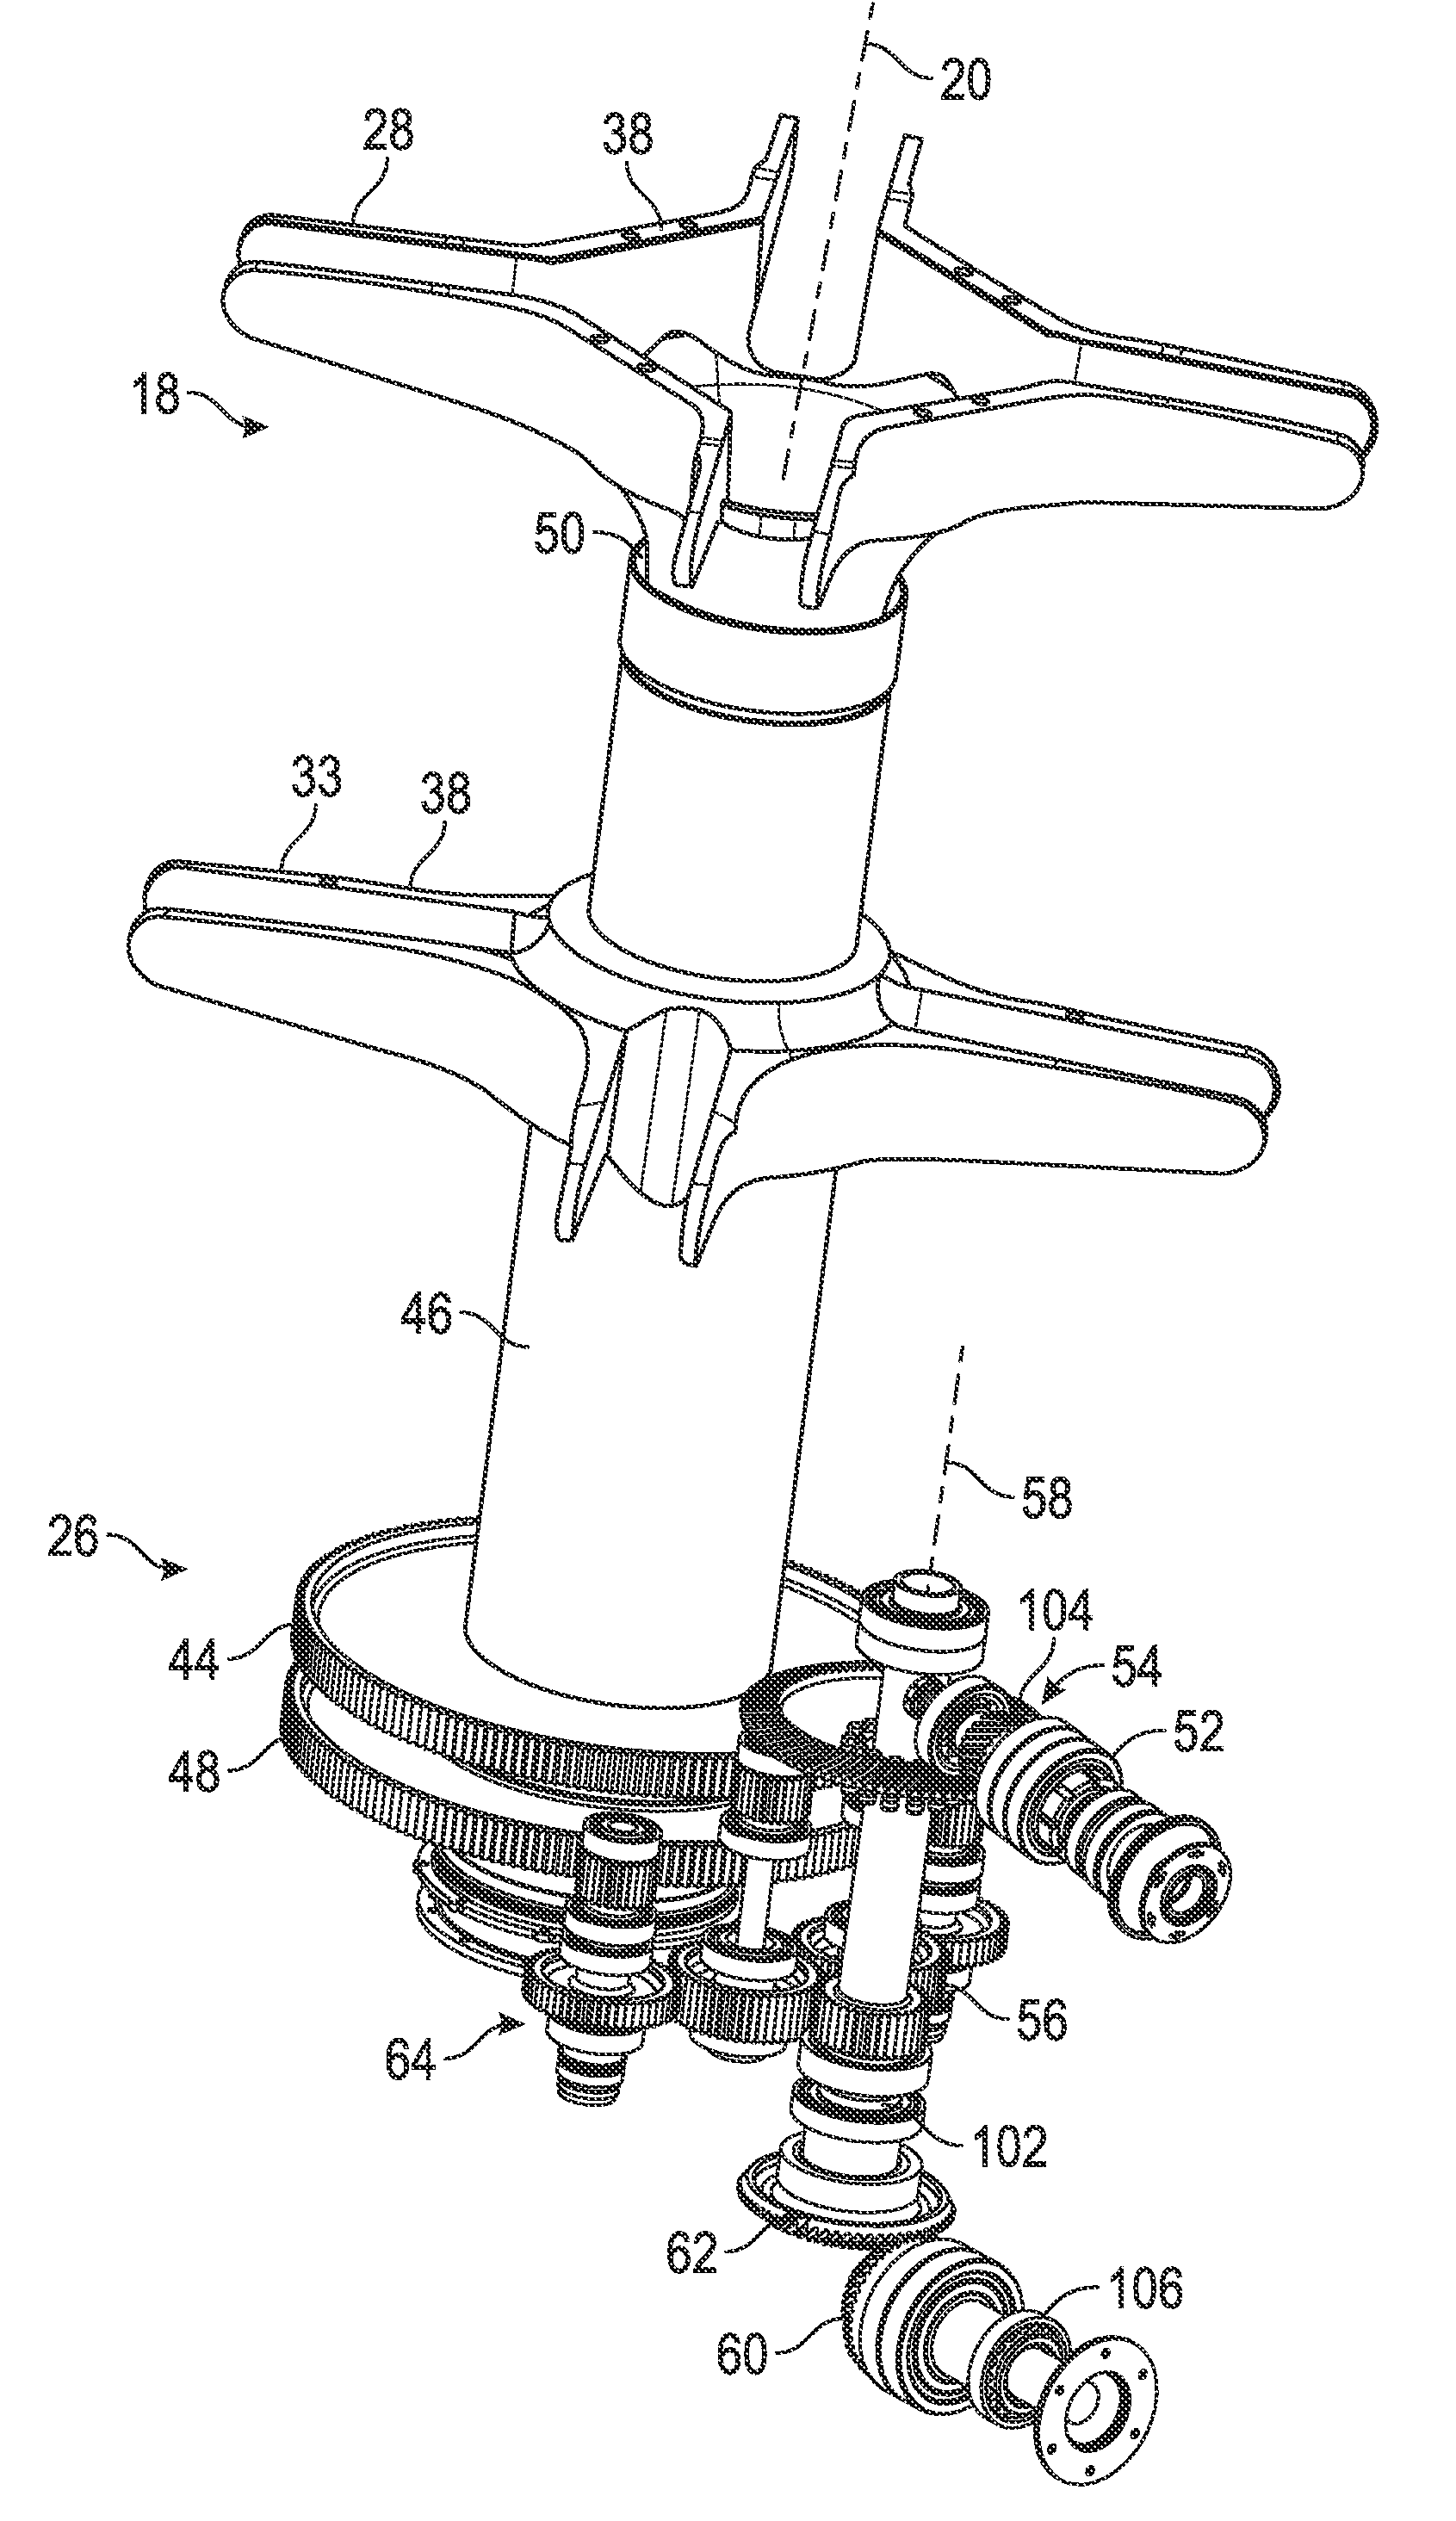 Torque split gearbox for rotary wing aircraft